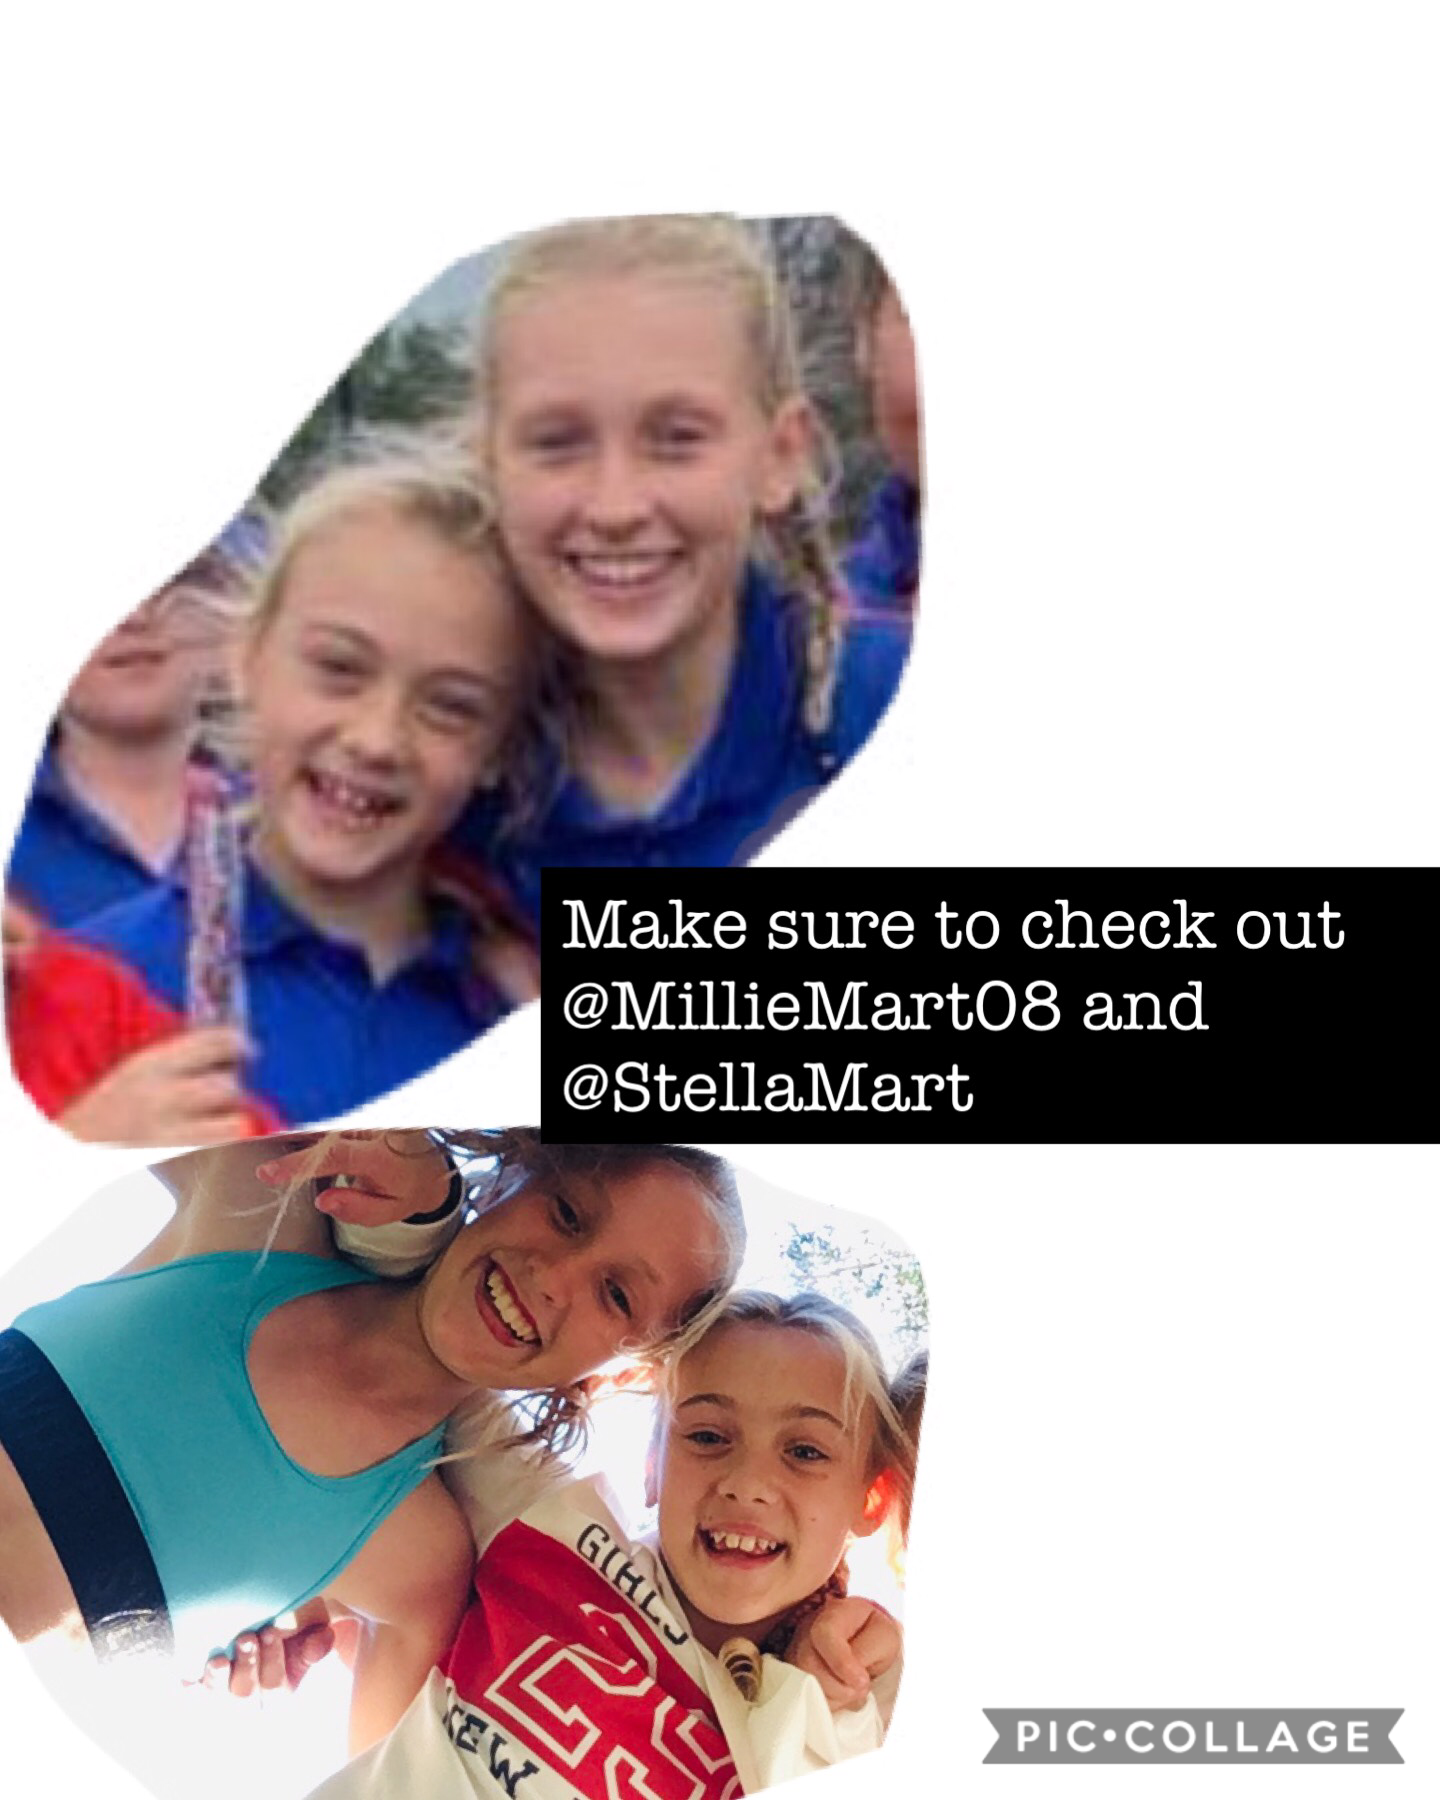 Welcome to our new account hope you like what you see don’t forget to check out @MillieMart08 and @StellaMart